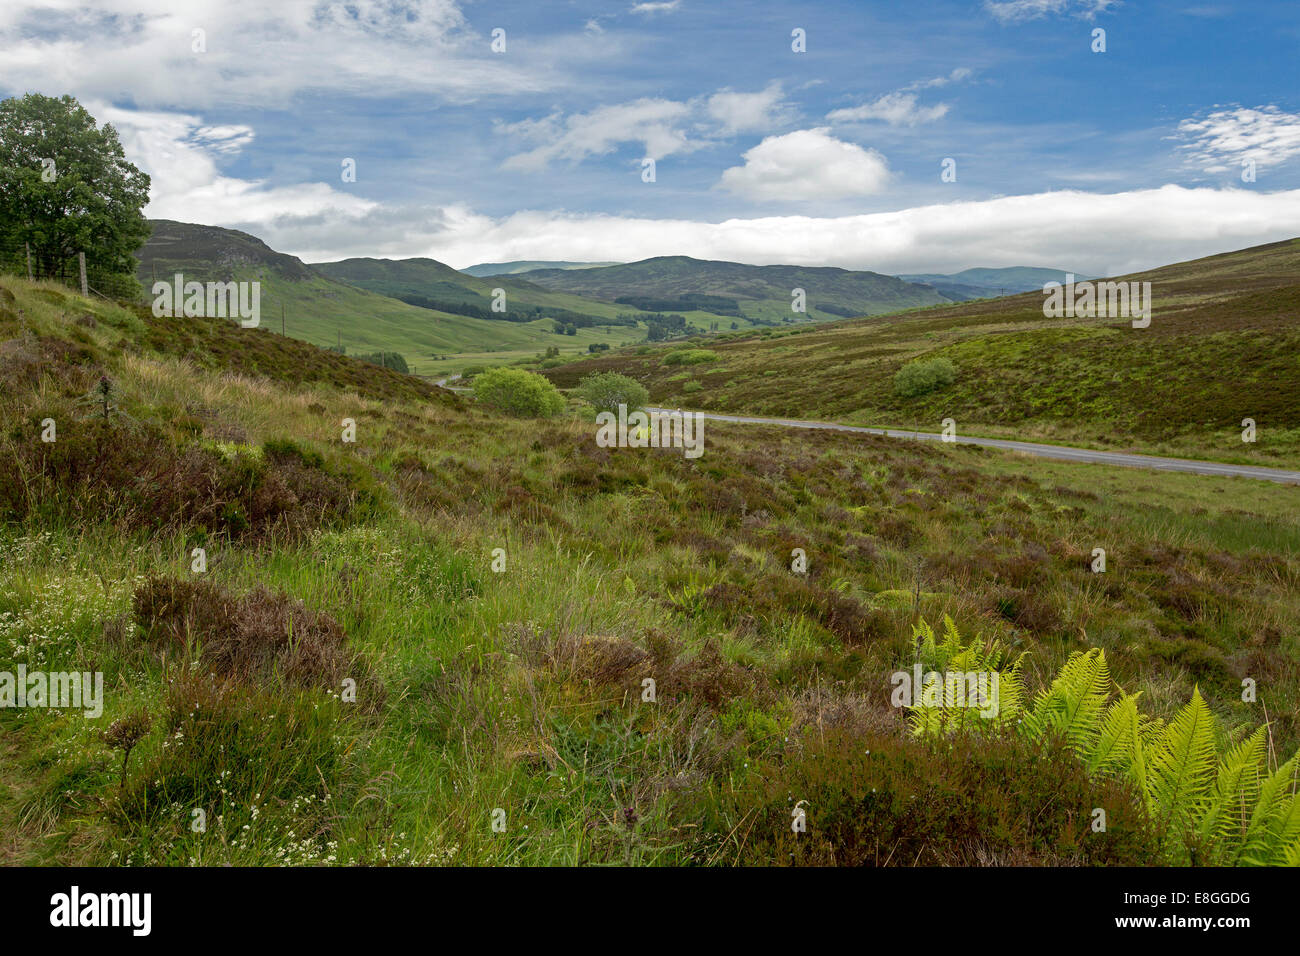 Vast and picturesque landscape of rolling green hills daubed with heather leading to mountains under blue sky in Scotland Stock Photo